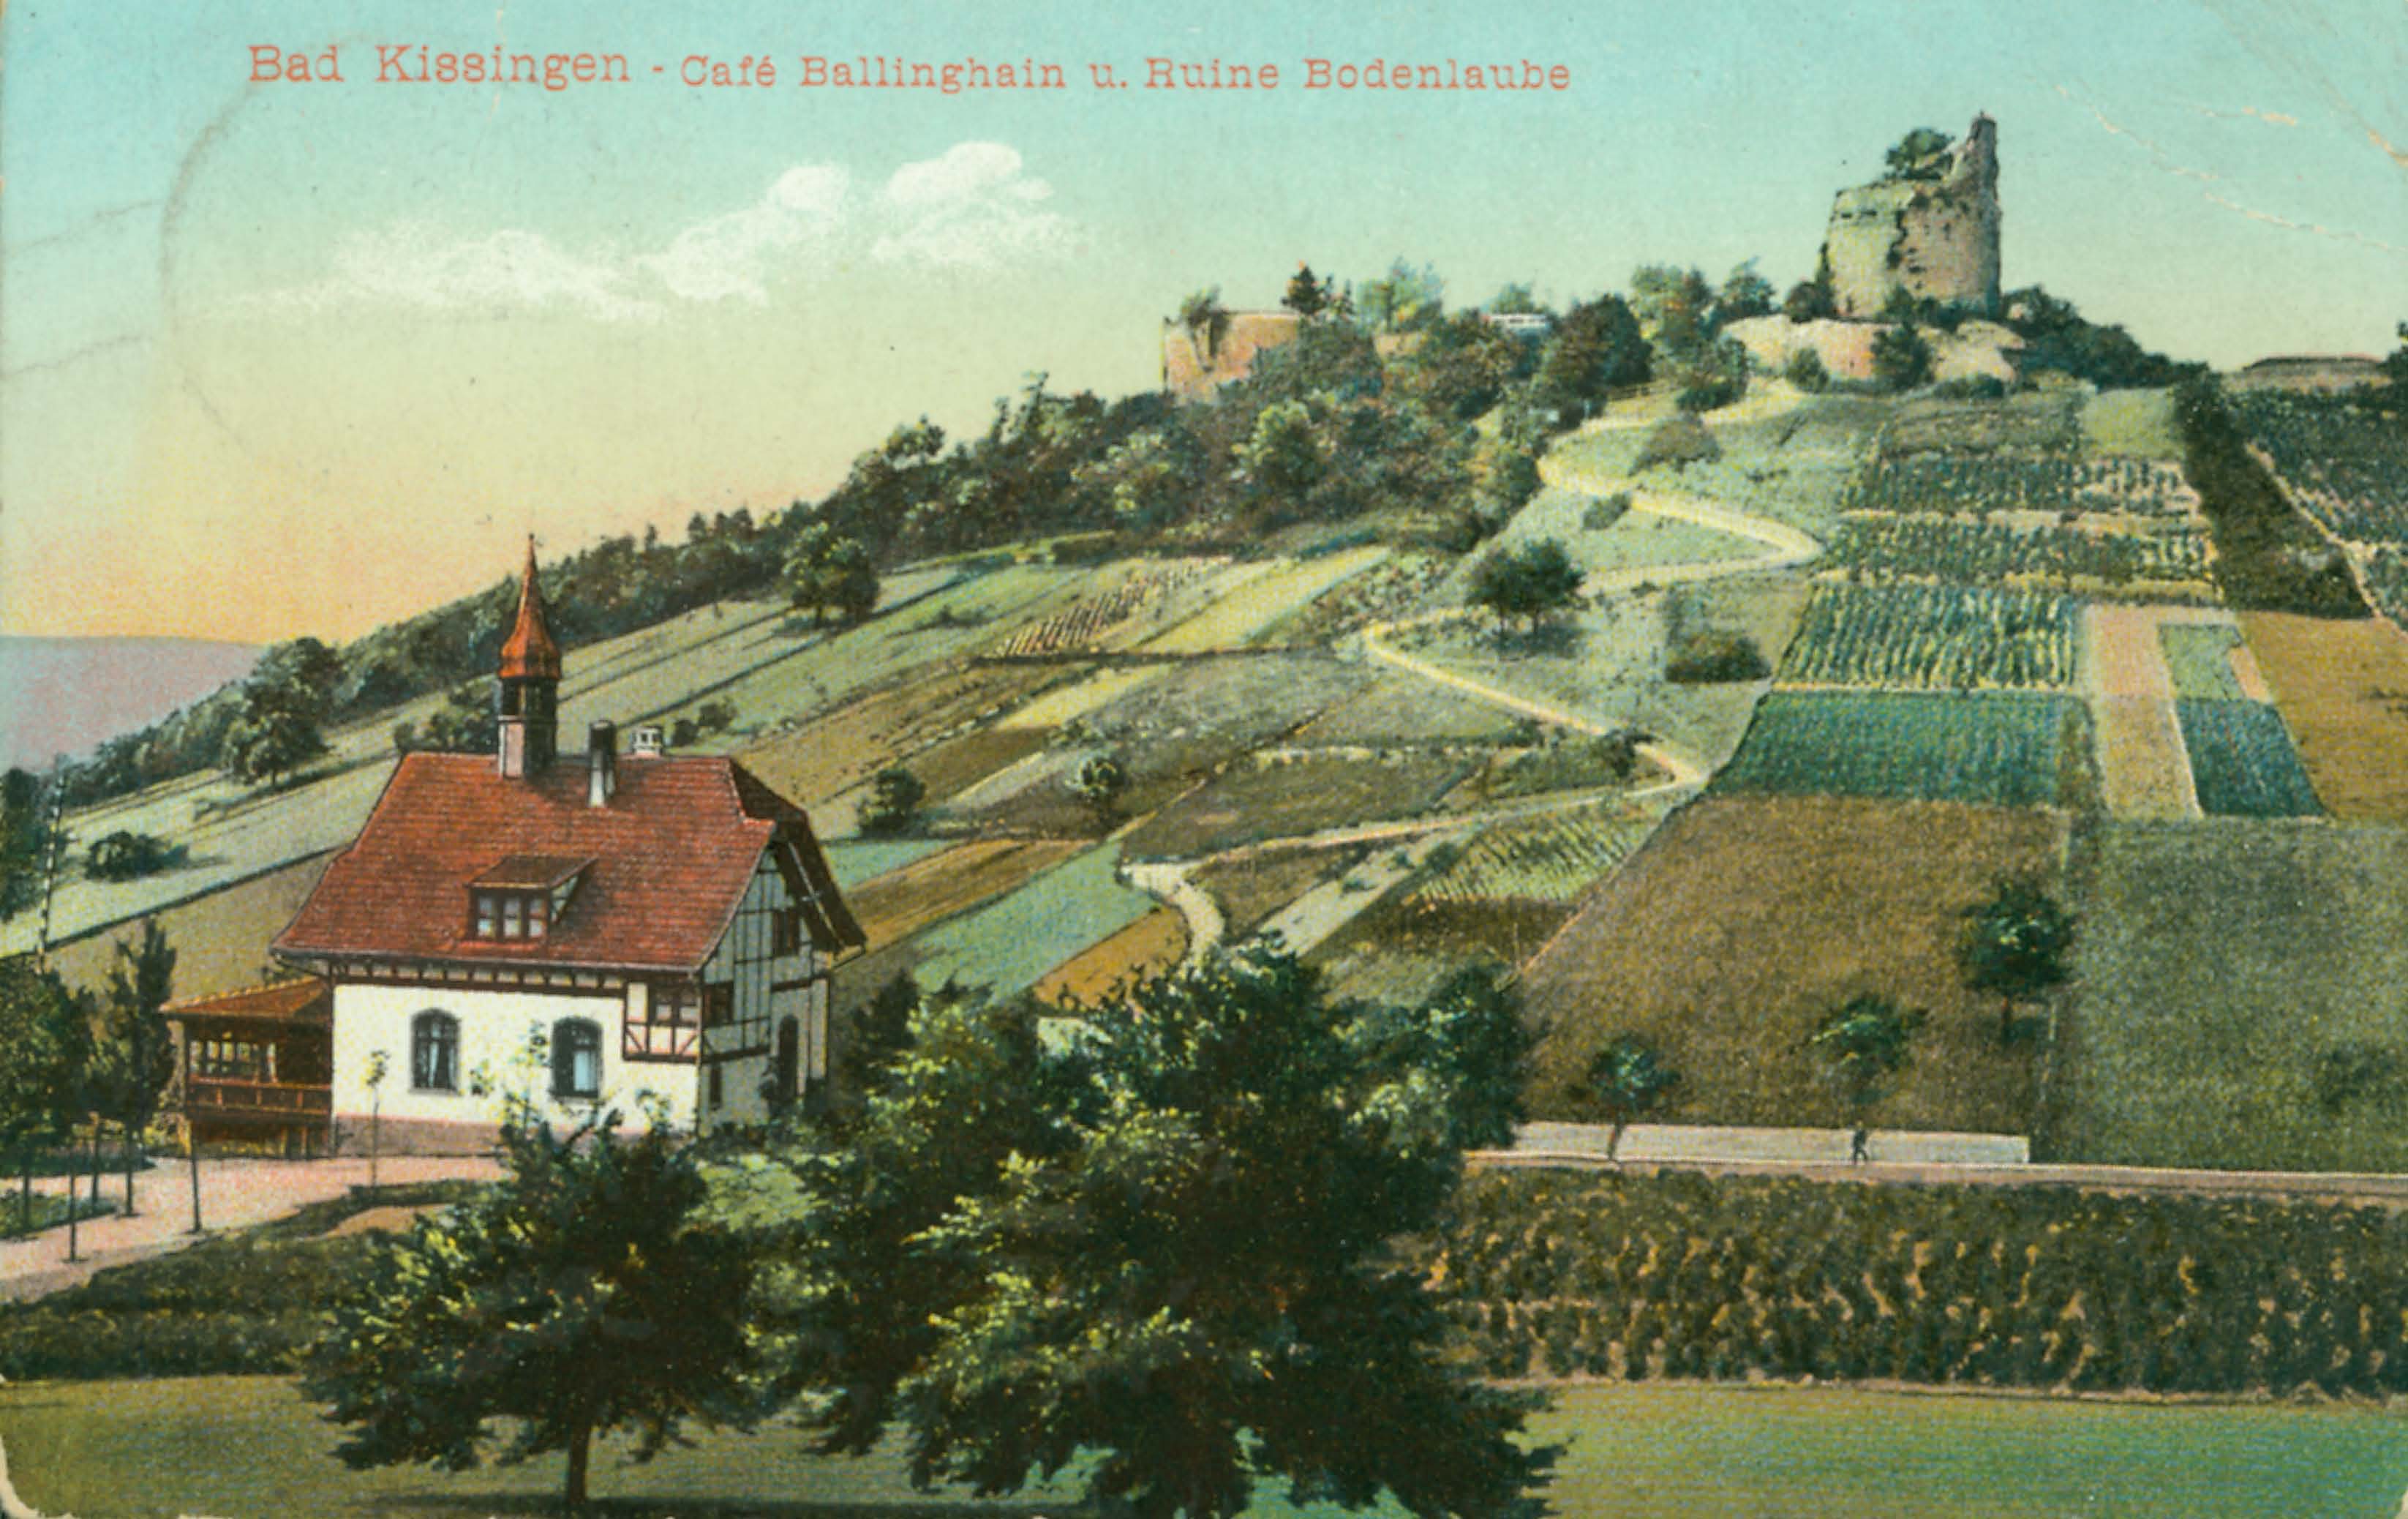 Postcard featuring a cafe in Bad Kissingen.